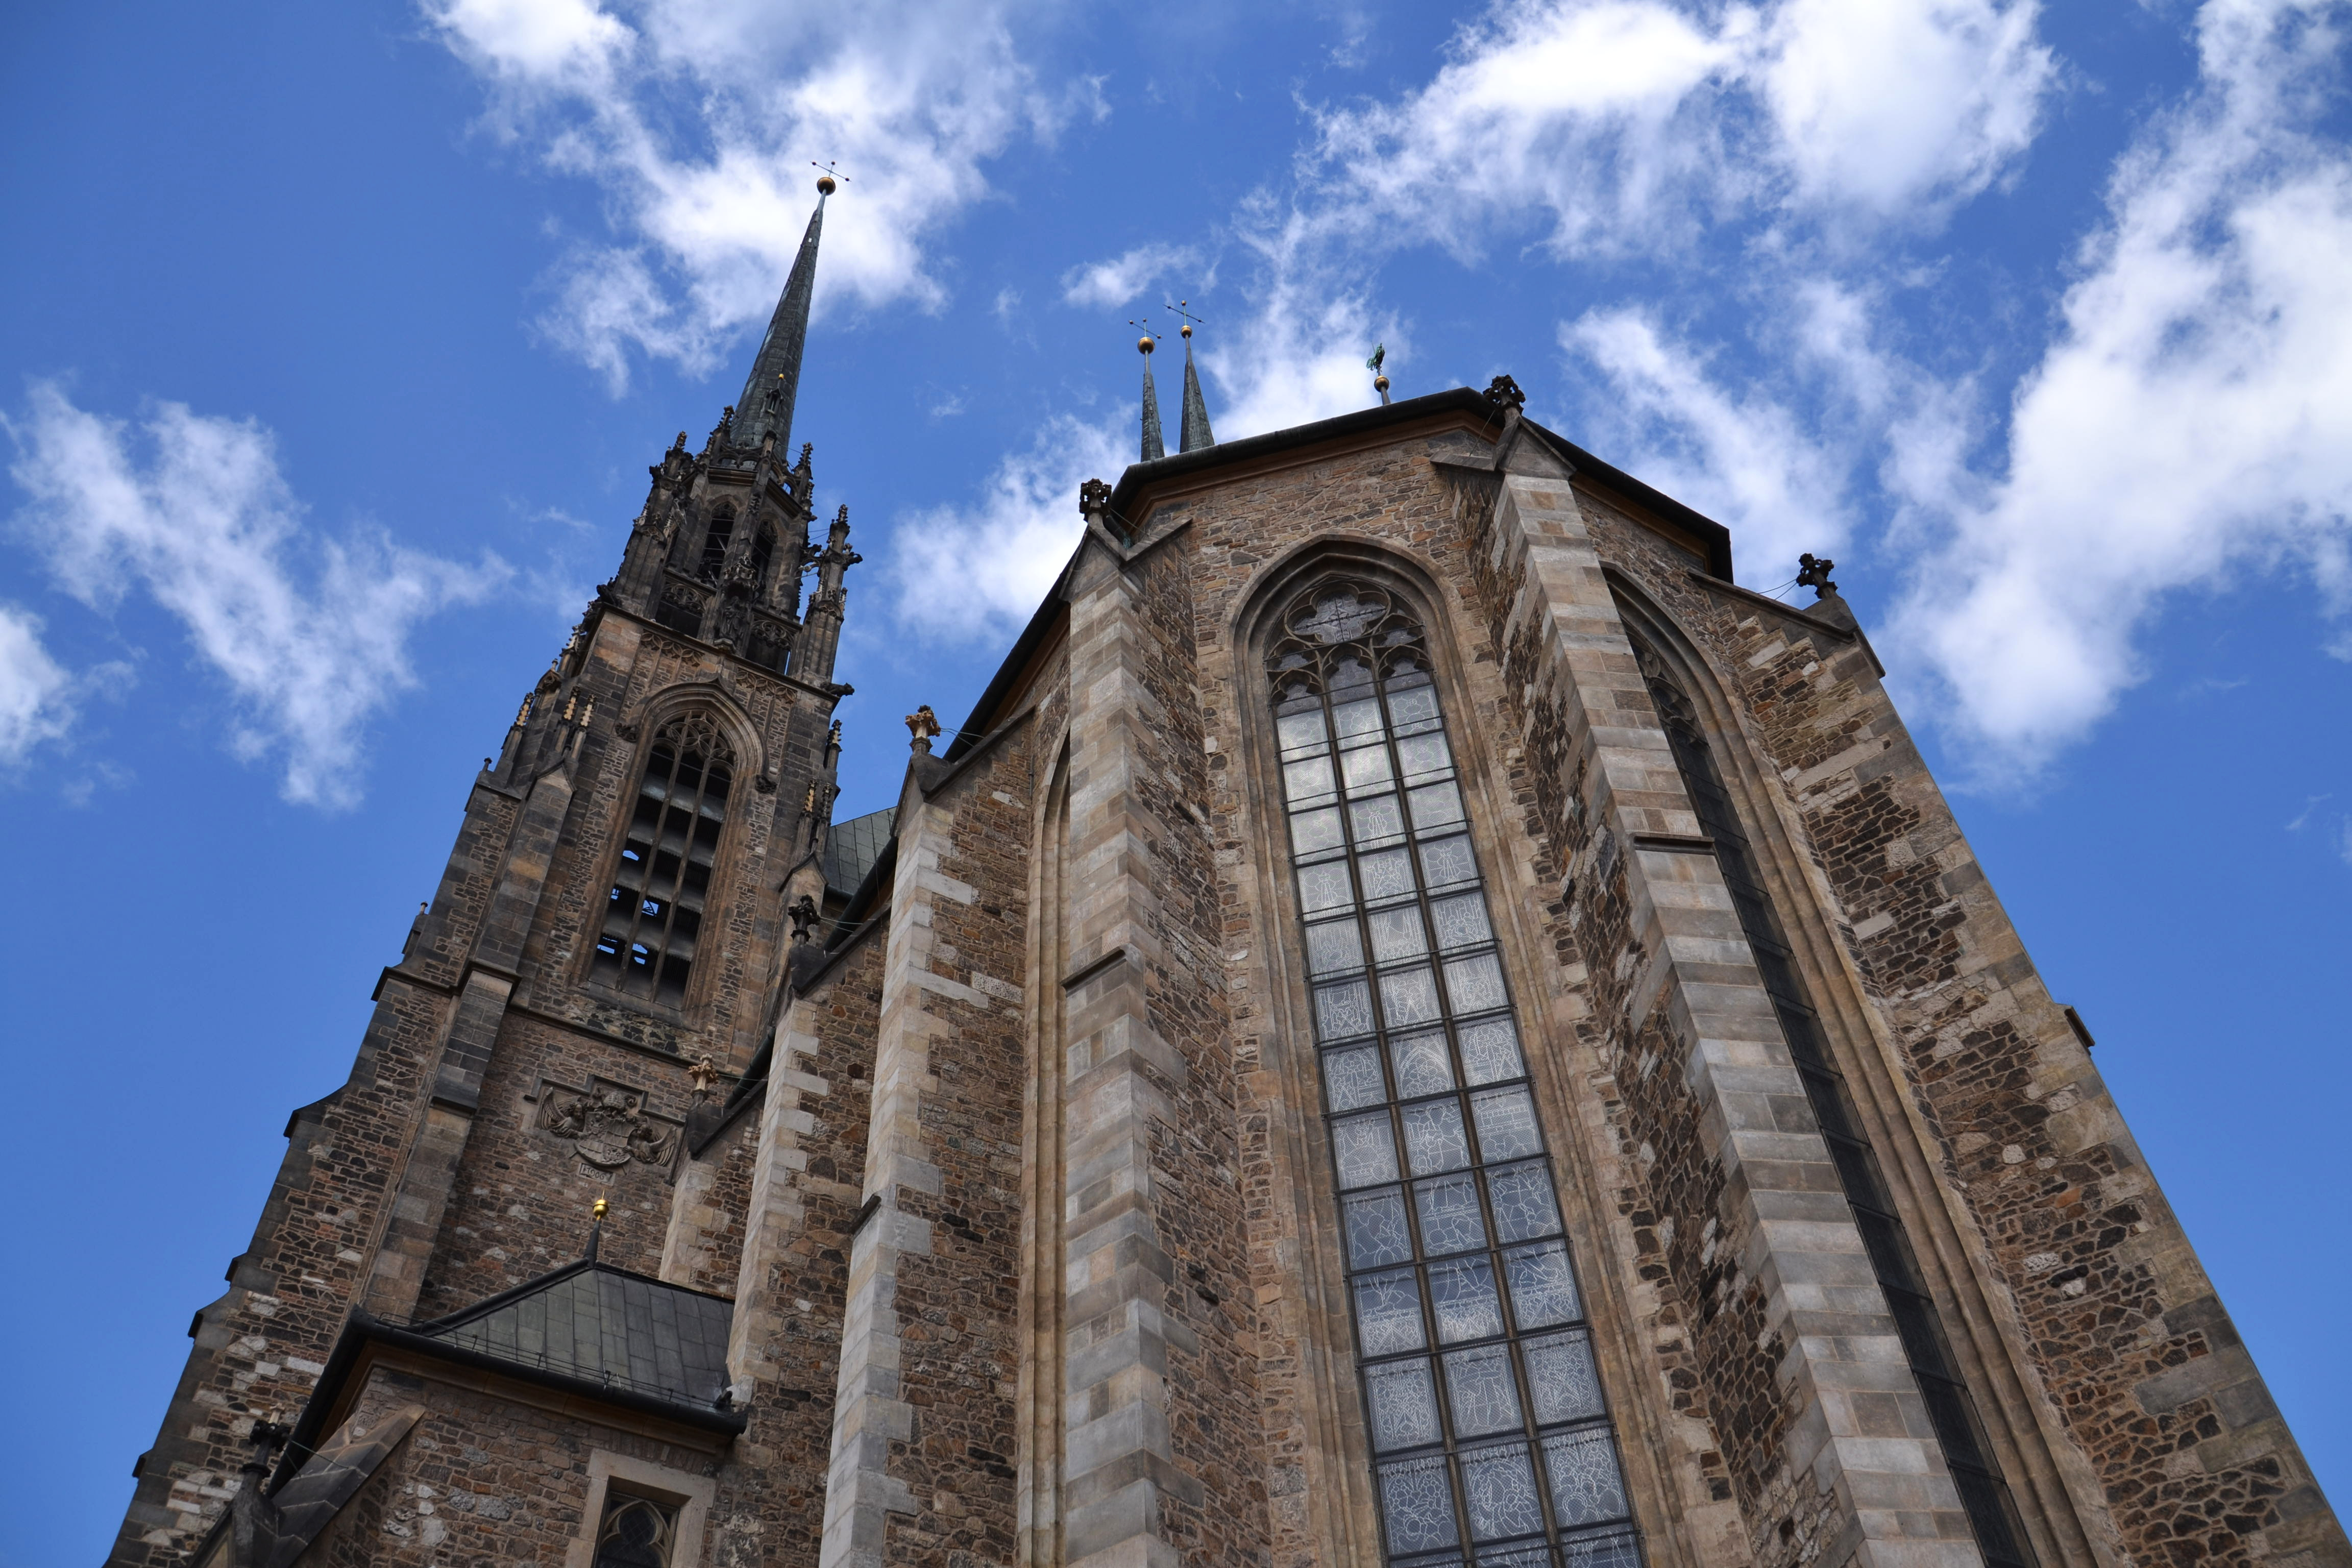 Czech Republic - St. Peter and Paul's Cathedral in Brno